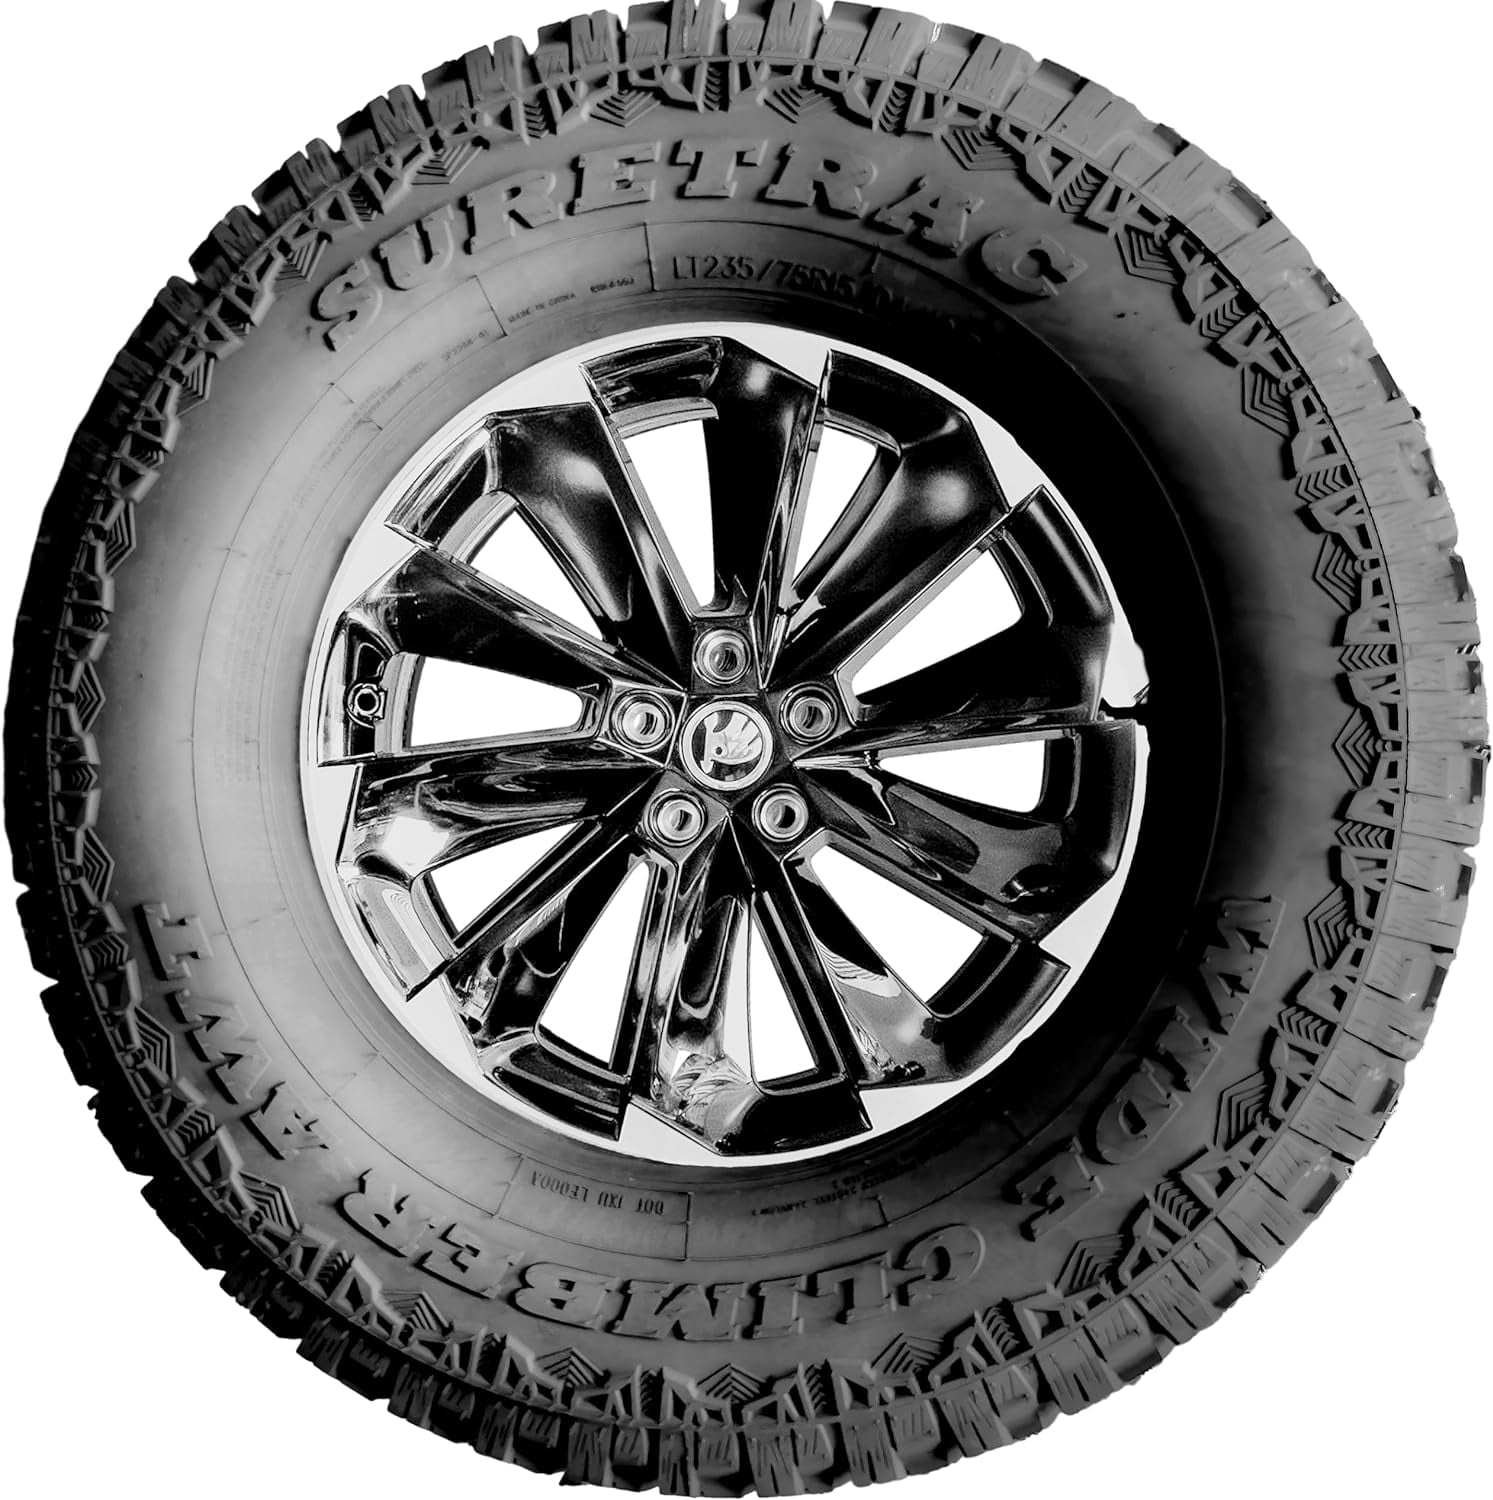 Wide All tire off Terrain Climber Suretrac road AWT 125Q LT35X12.50R20 F/12 light truck Traction Weather All OWL